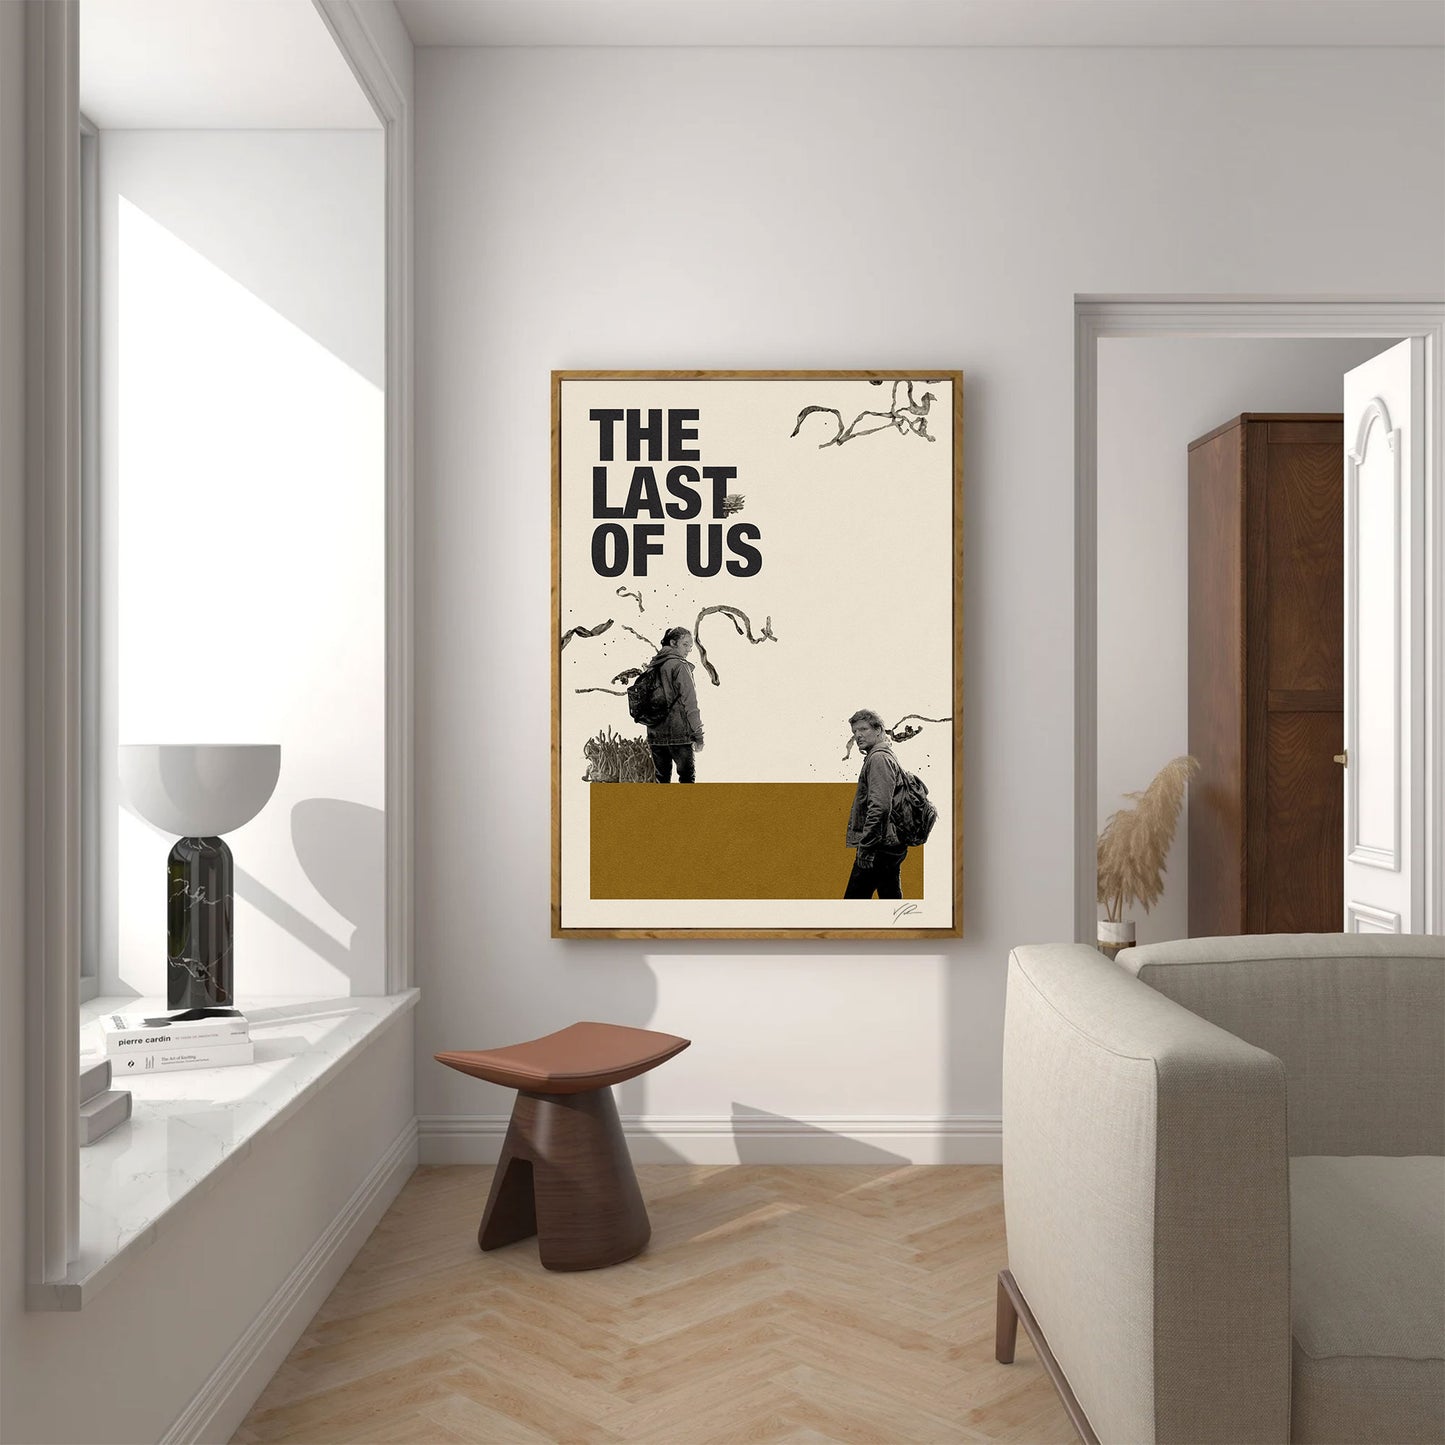 The Last Of Us - Print Arts - poster, the last of us, tv show poster